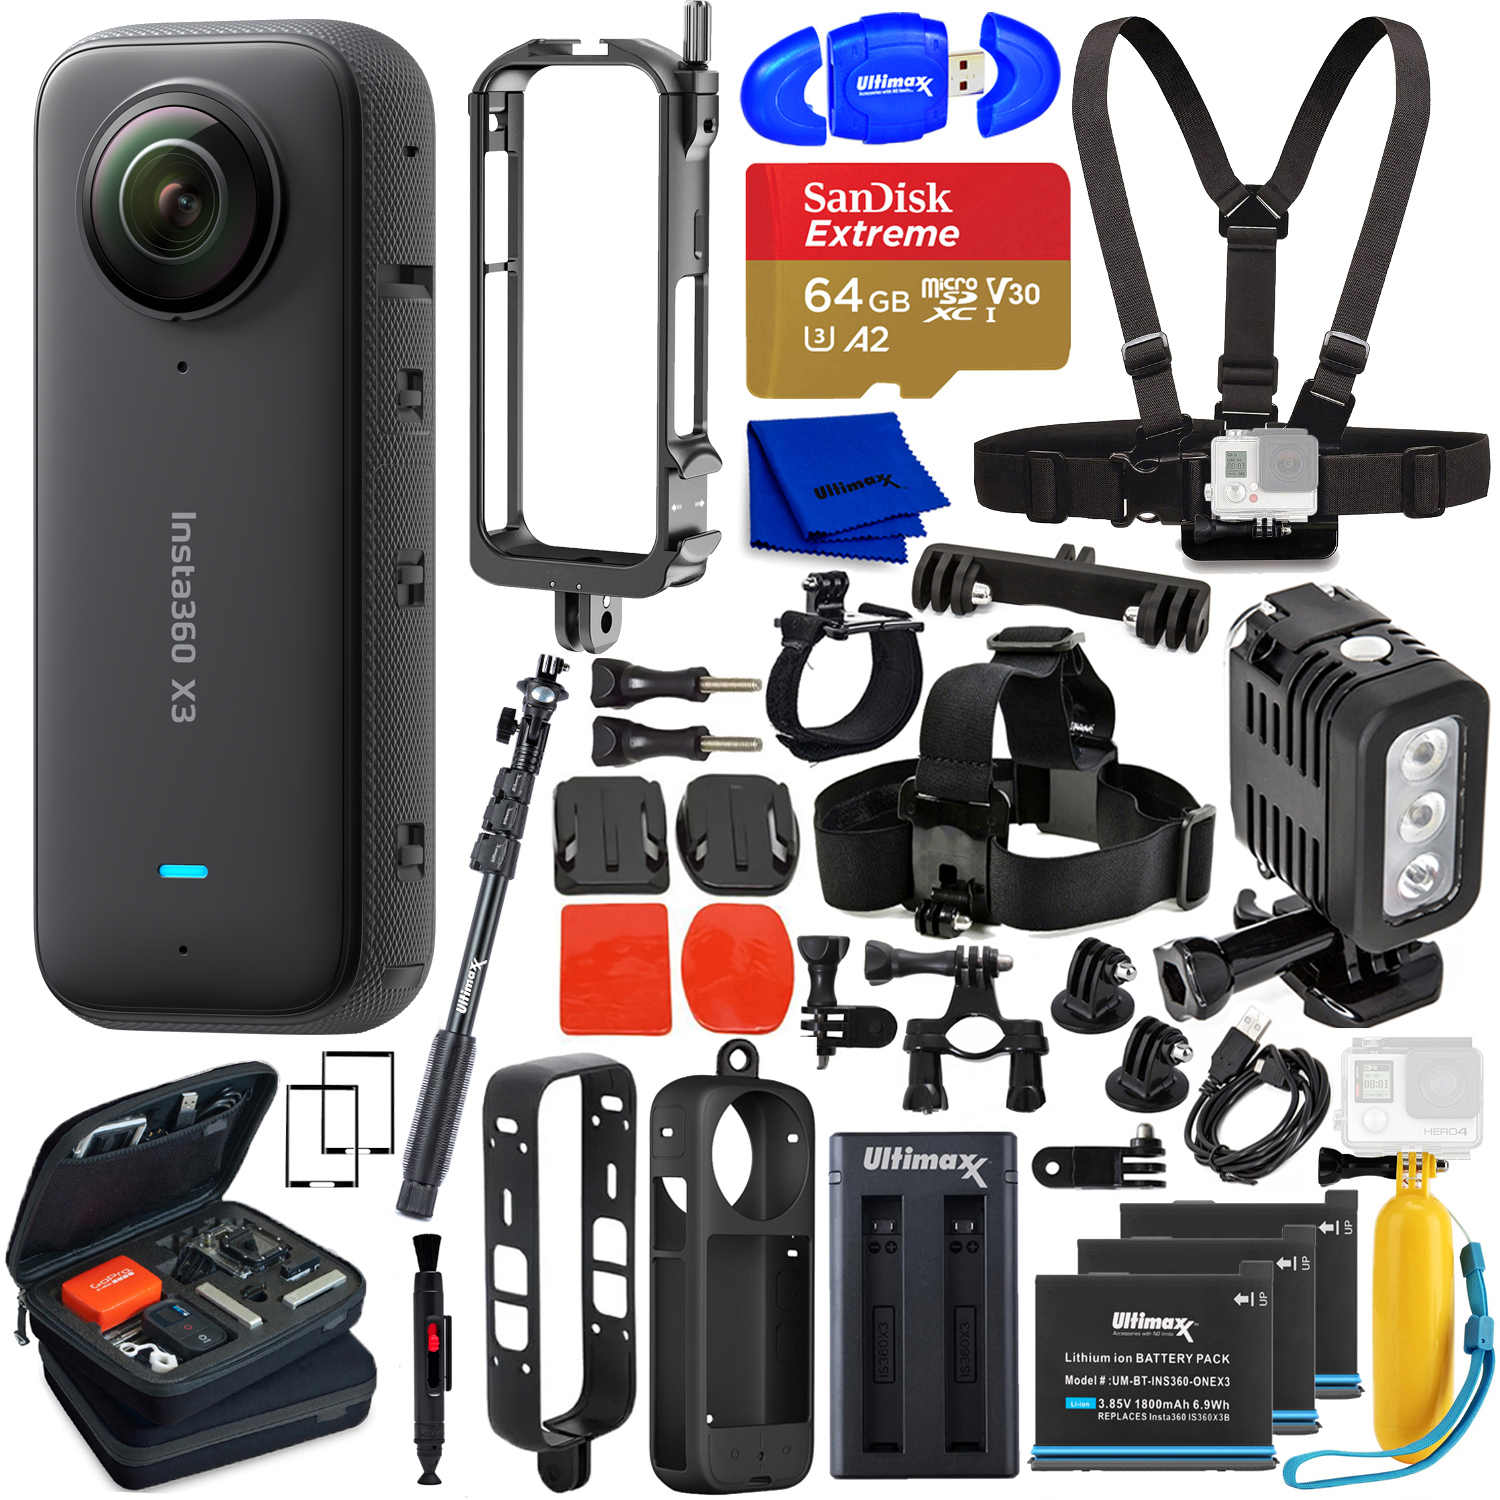 Insta360 X3 Bullet Time Kit - 360 Action Camera with 5.7K 360 Active HDR Video, 4K Single-Lens Camera, Waterproof, FlowState Stabilization, 2.29